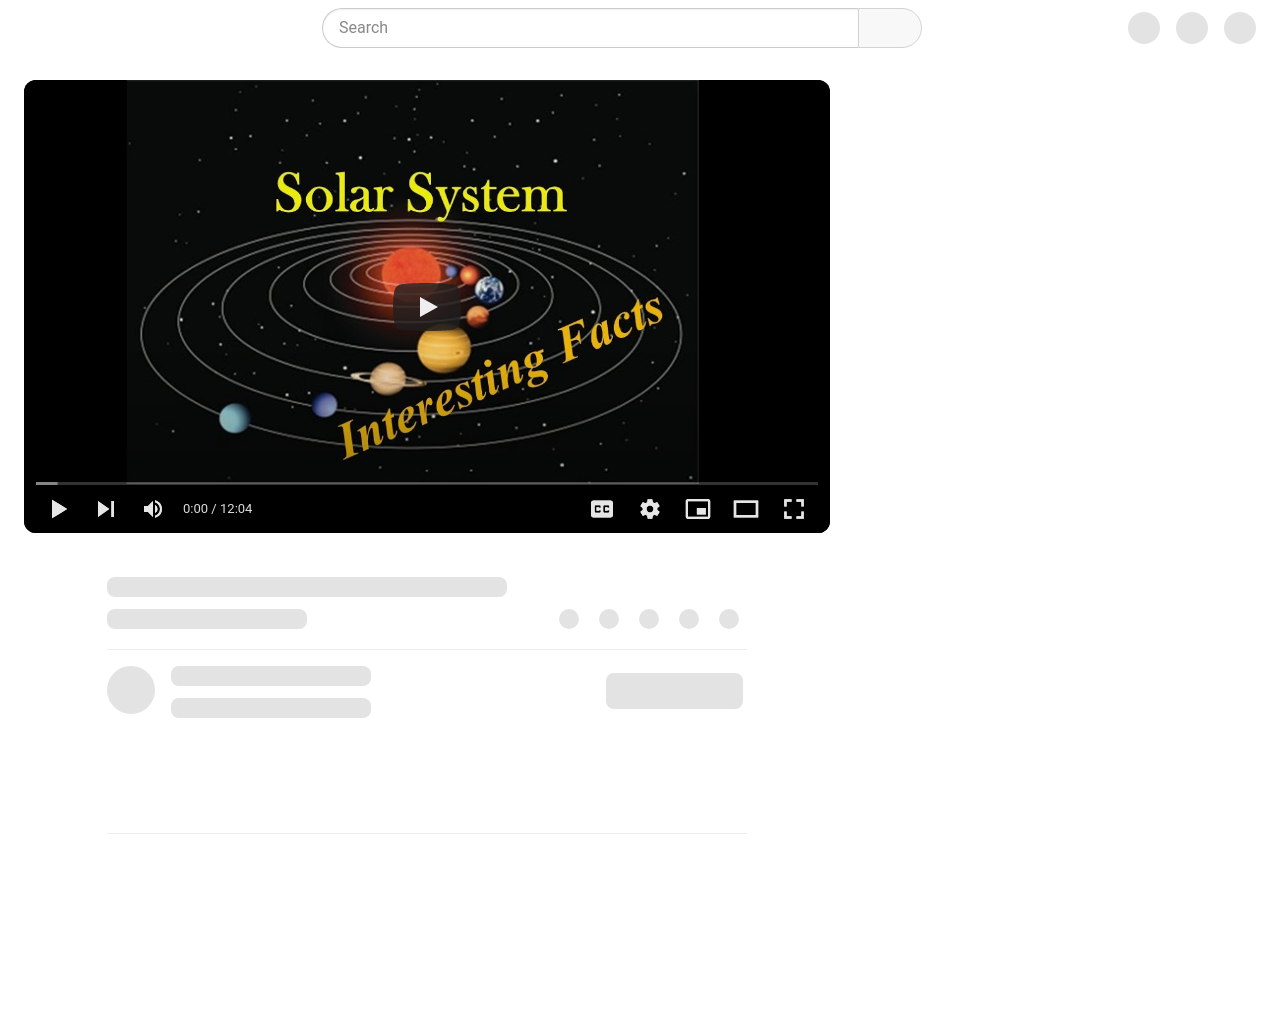 Solar System Facts For Kids